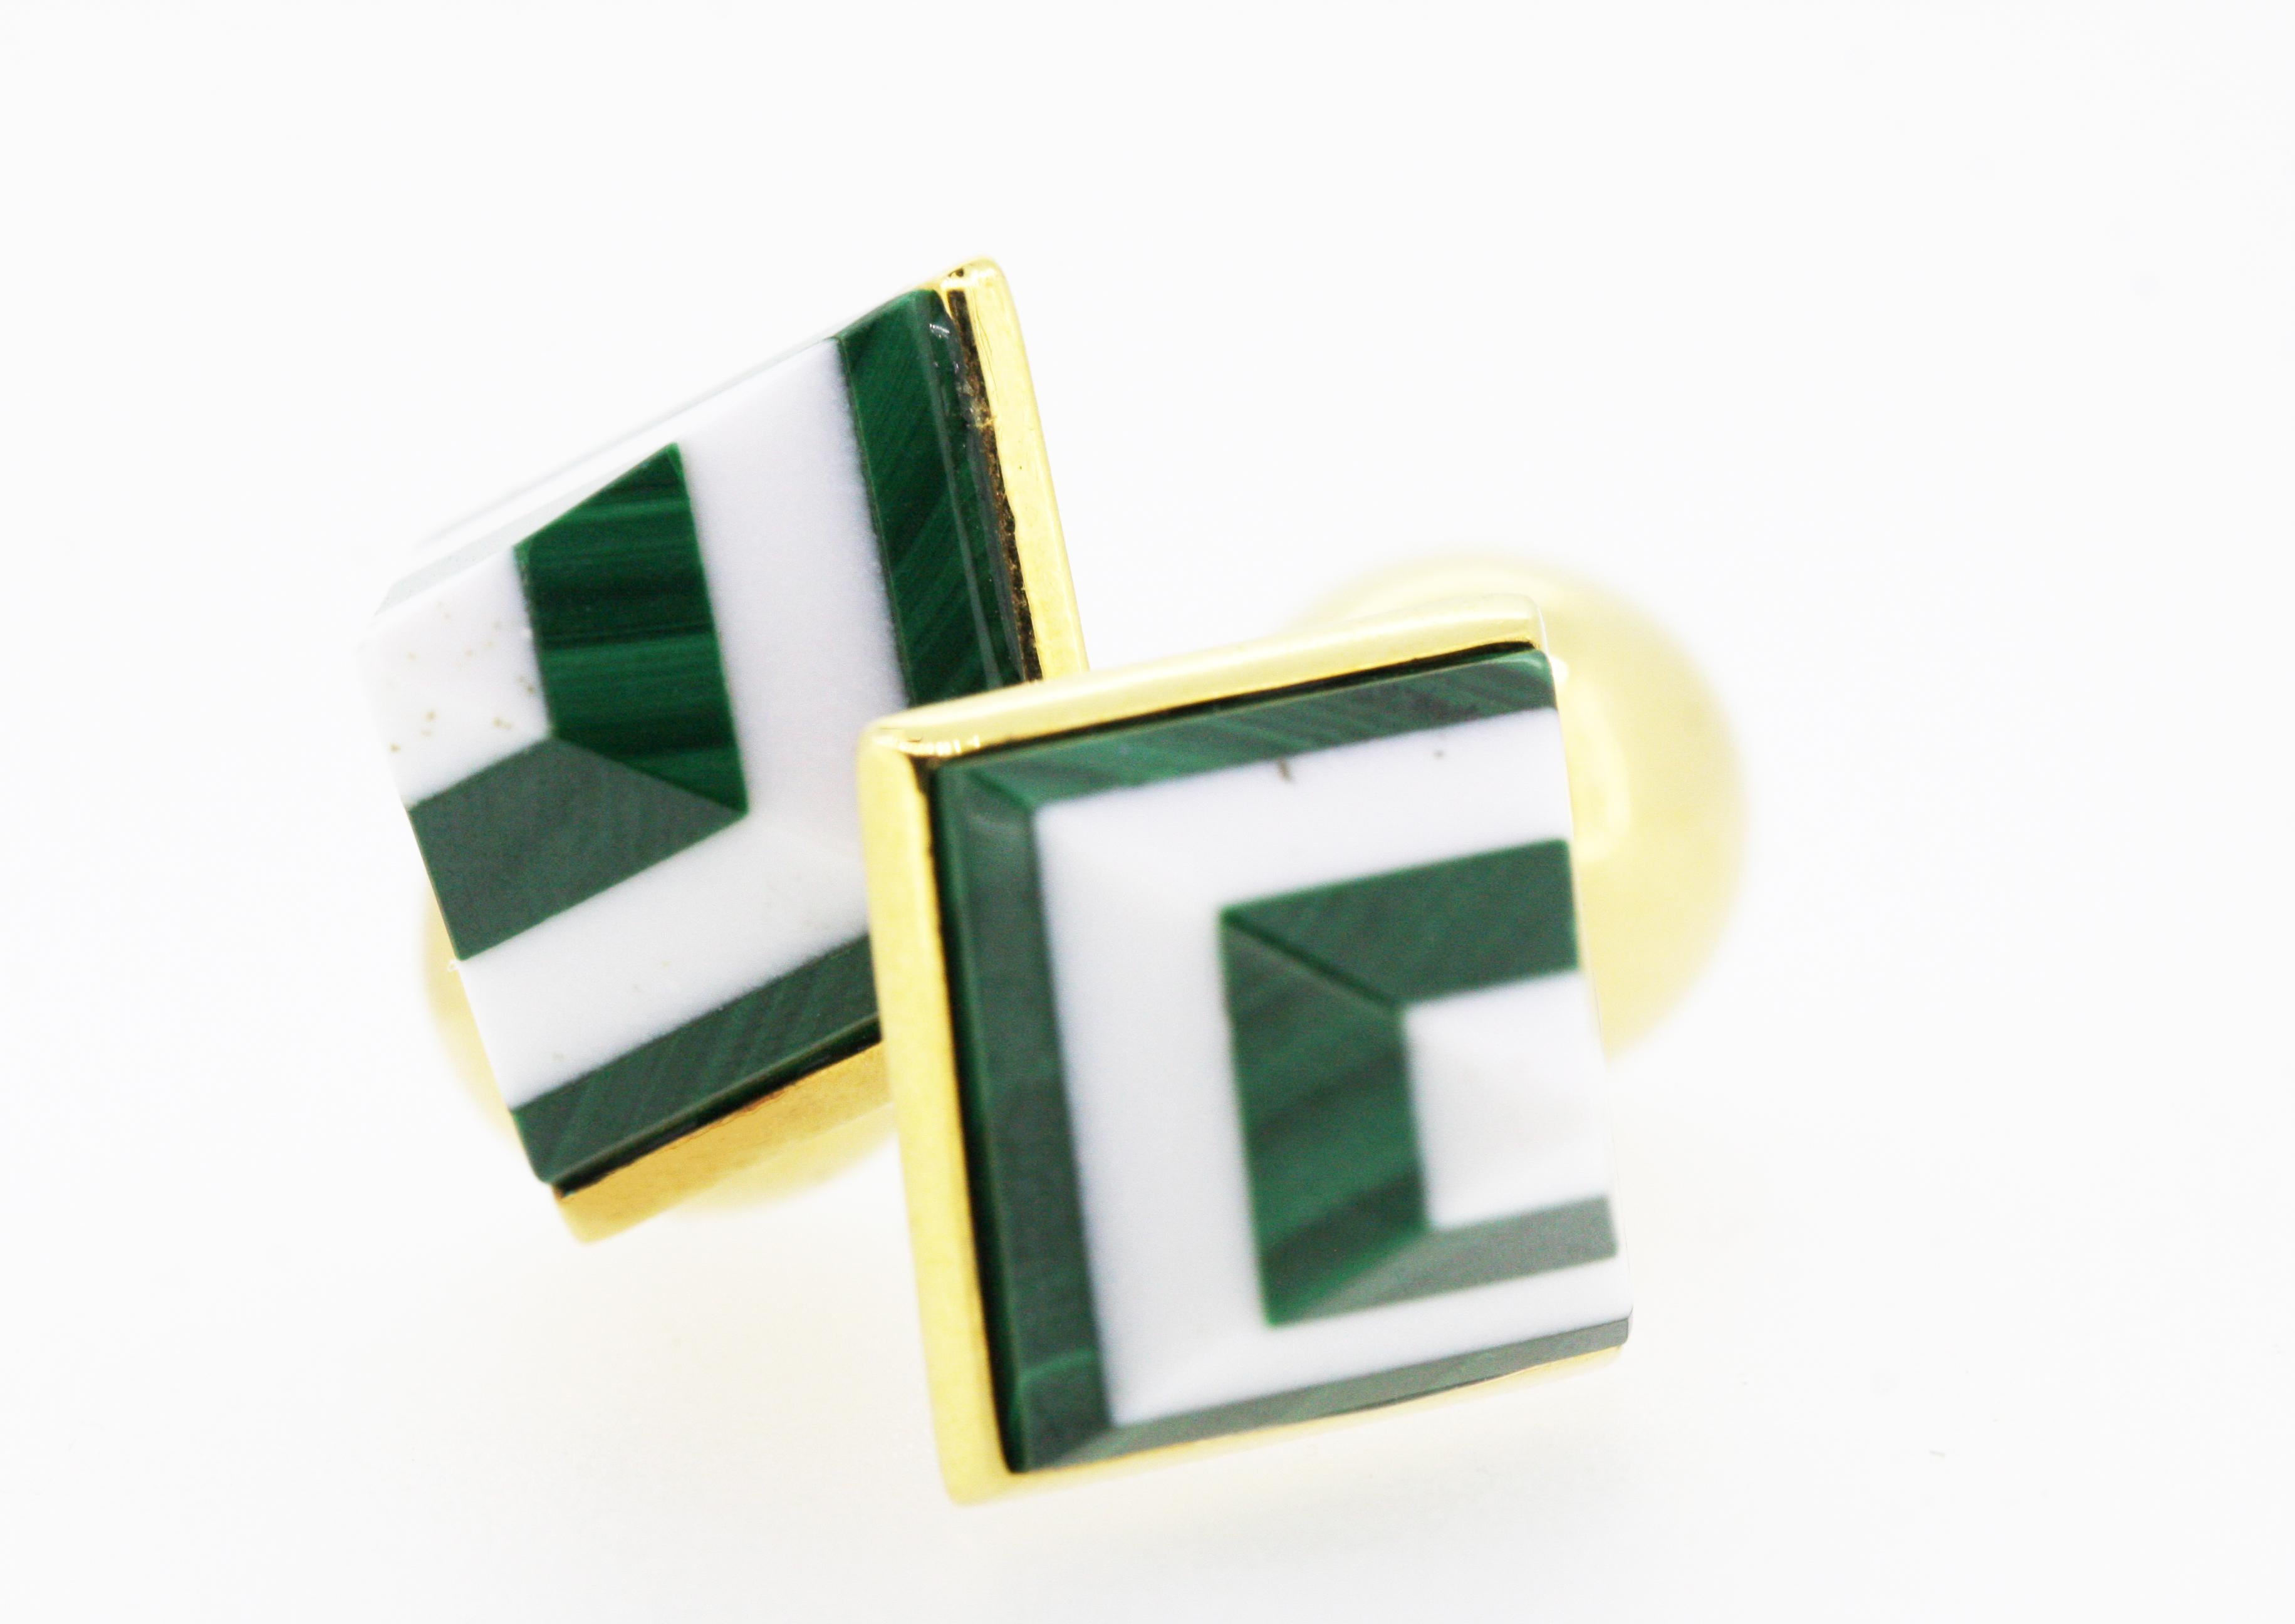 Marble Cufflinks with white and green stripes in 18k yellow gold
Small difference between the cufflinks are reasoned by the handcrafted manufacture.
The piece is a unique one.
It is manufactured by Antorà, an italian artisanal niche company, well